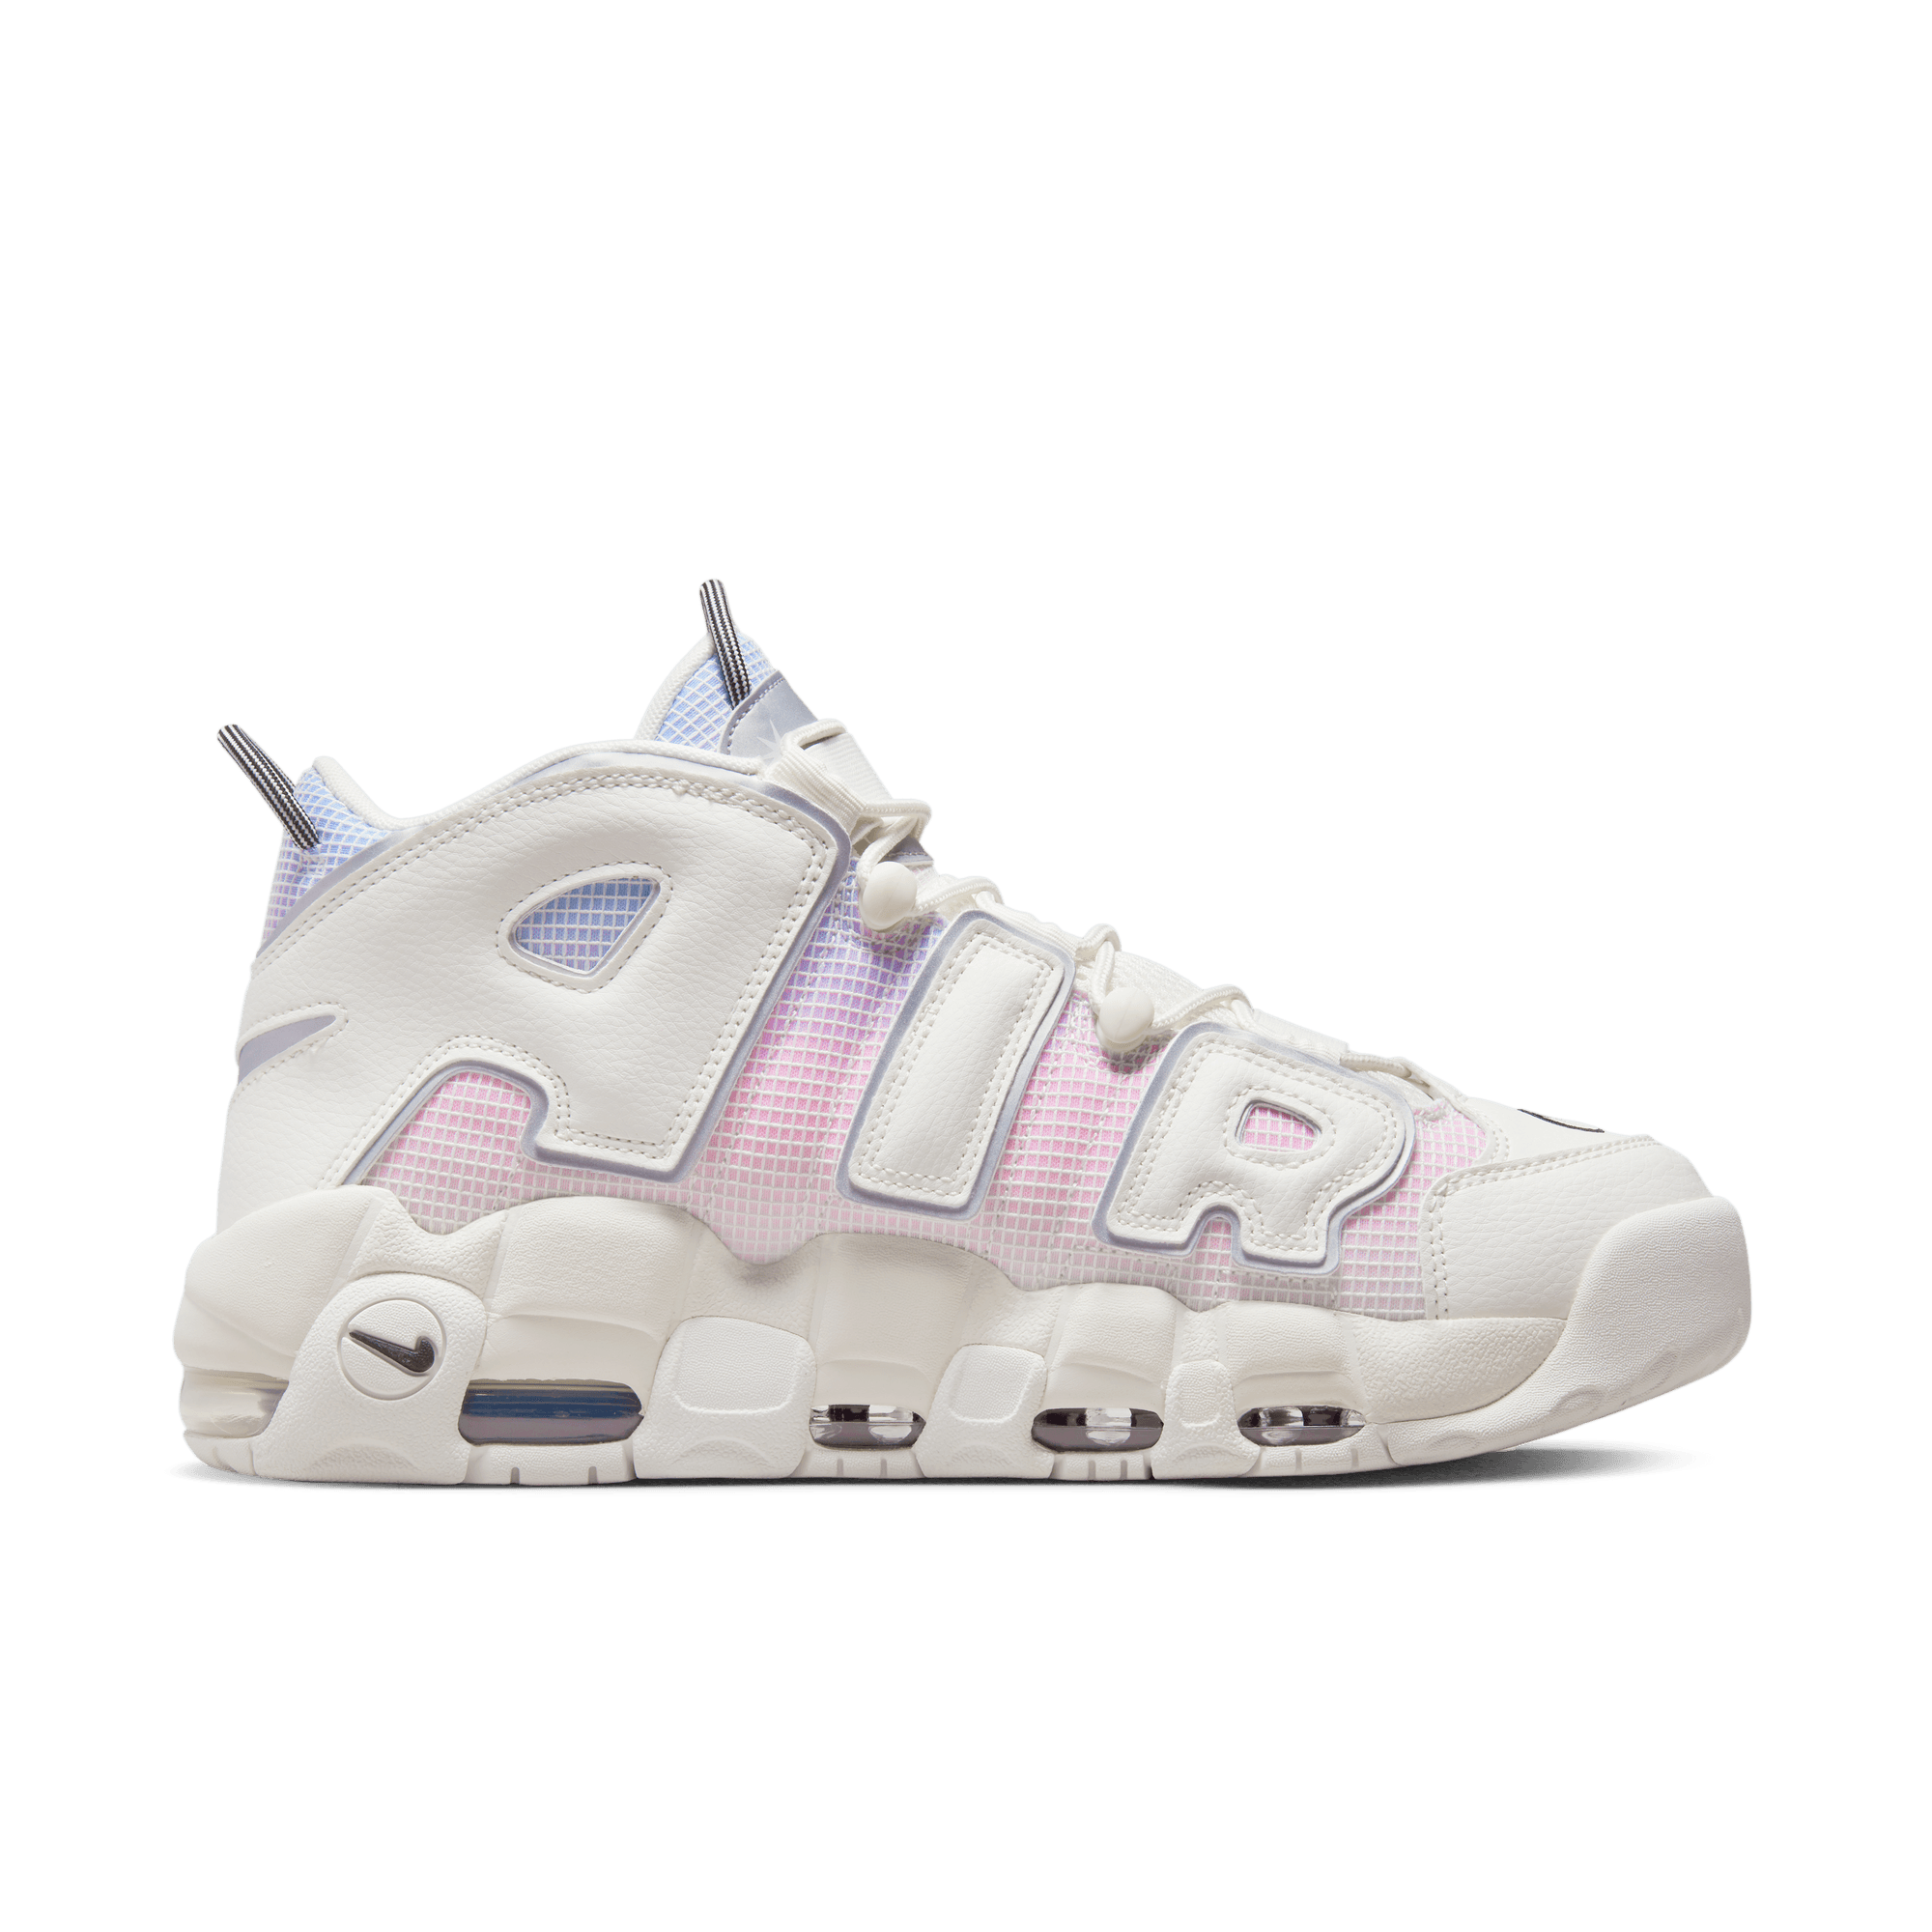 GBNY Nike Air More Uptempo White Pink Purple - Men's DR9612-100